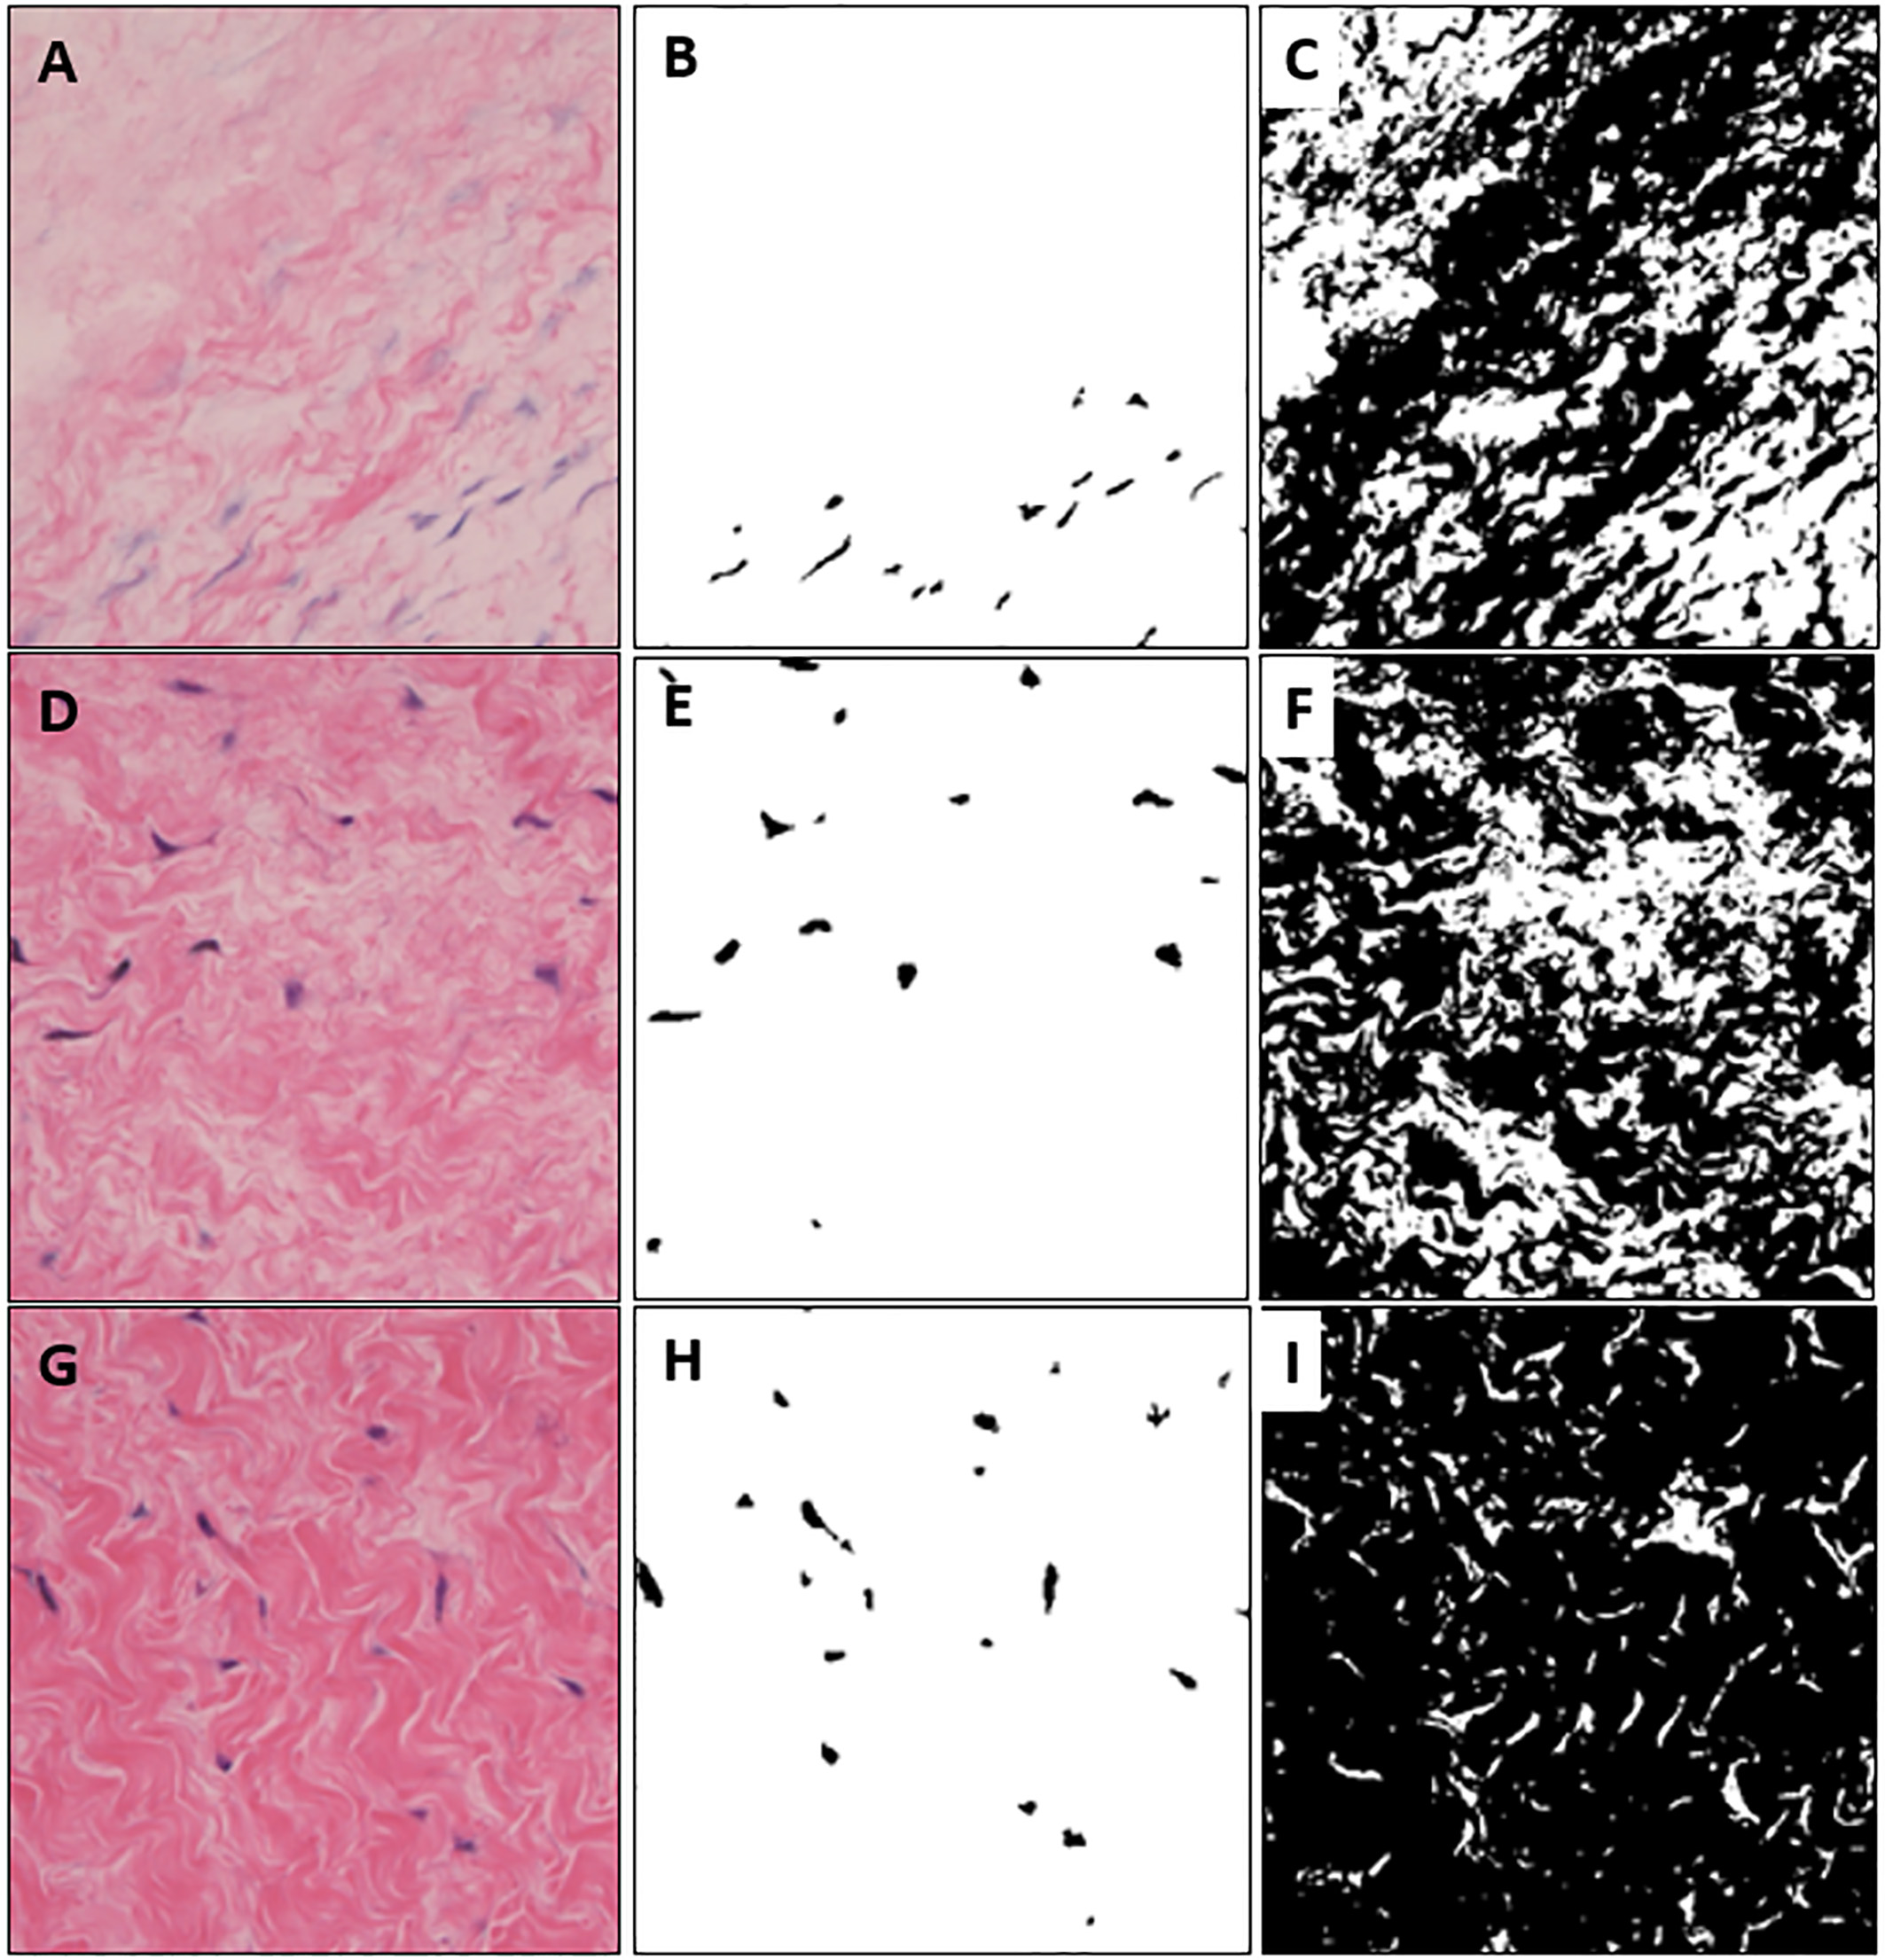 Extracted cell and tissue images from colored microscopic images with different brightness. (A) is high brightness, (D) is medium brightness, (G) is relatively darker brightness than (A) and (D). (B), (E), (H) are extracted cells and (C), (F), (I) are segmented tissue images.